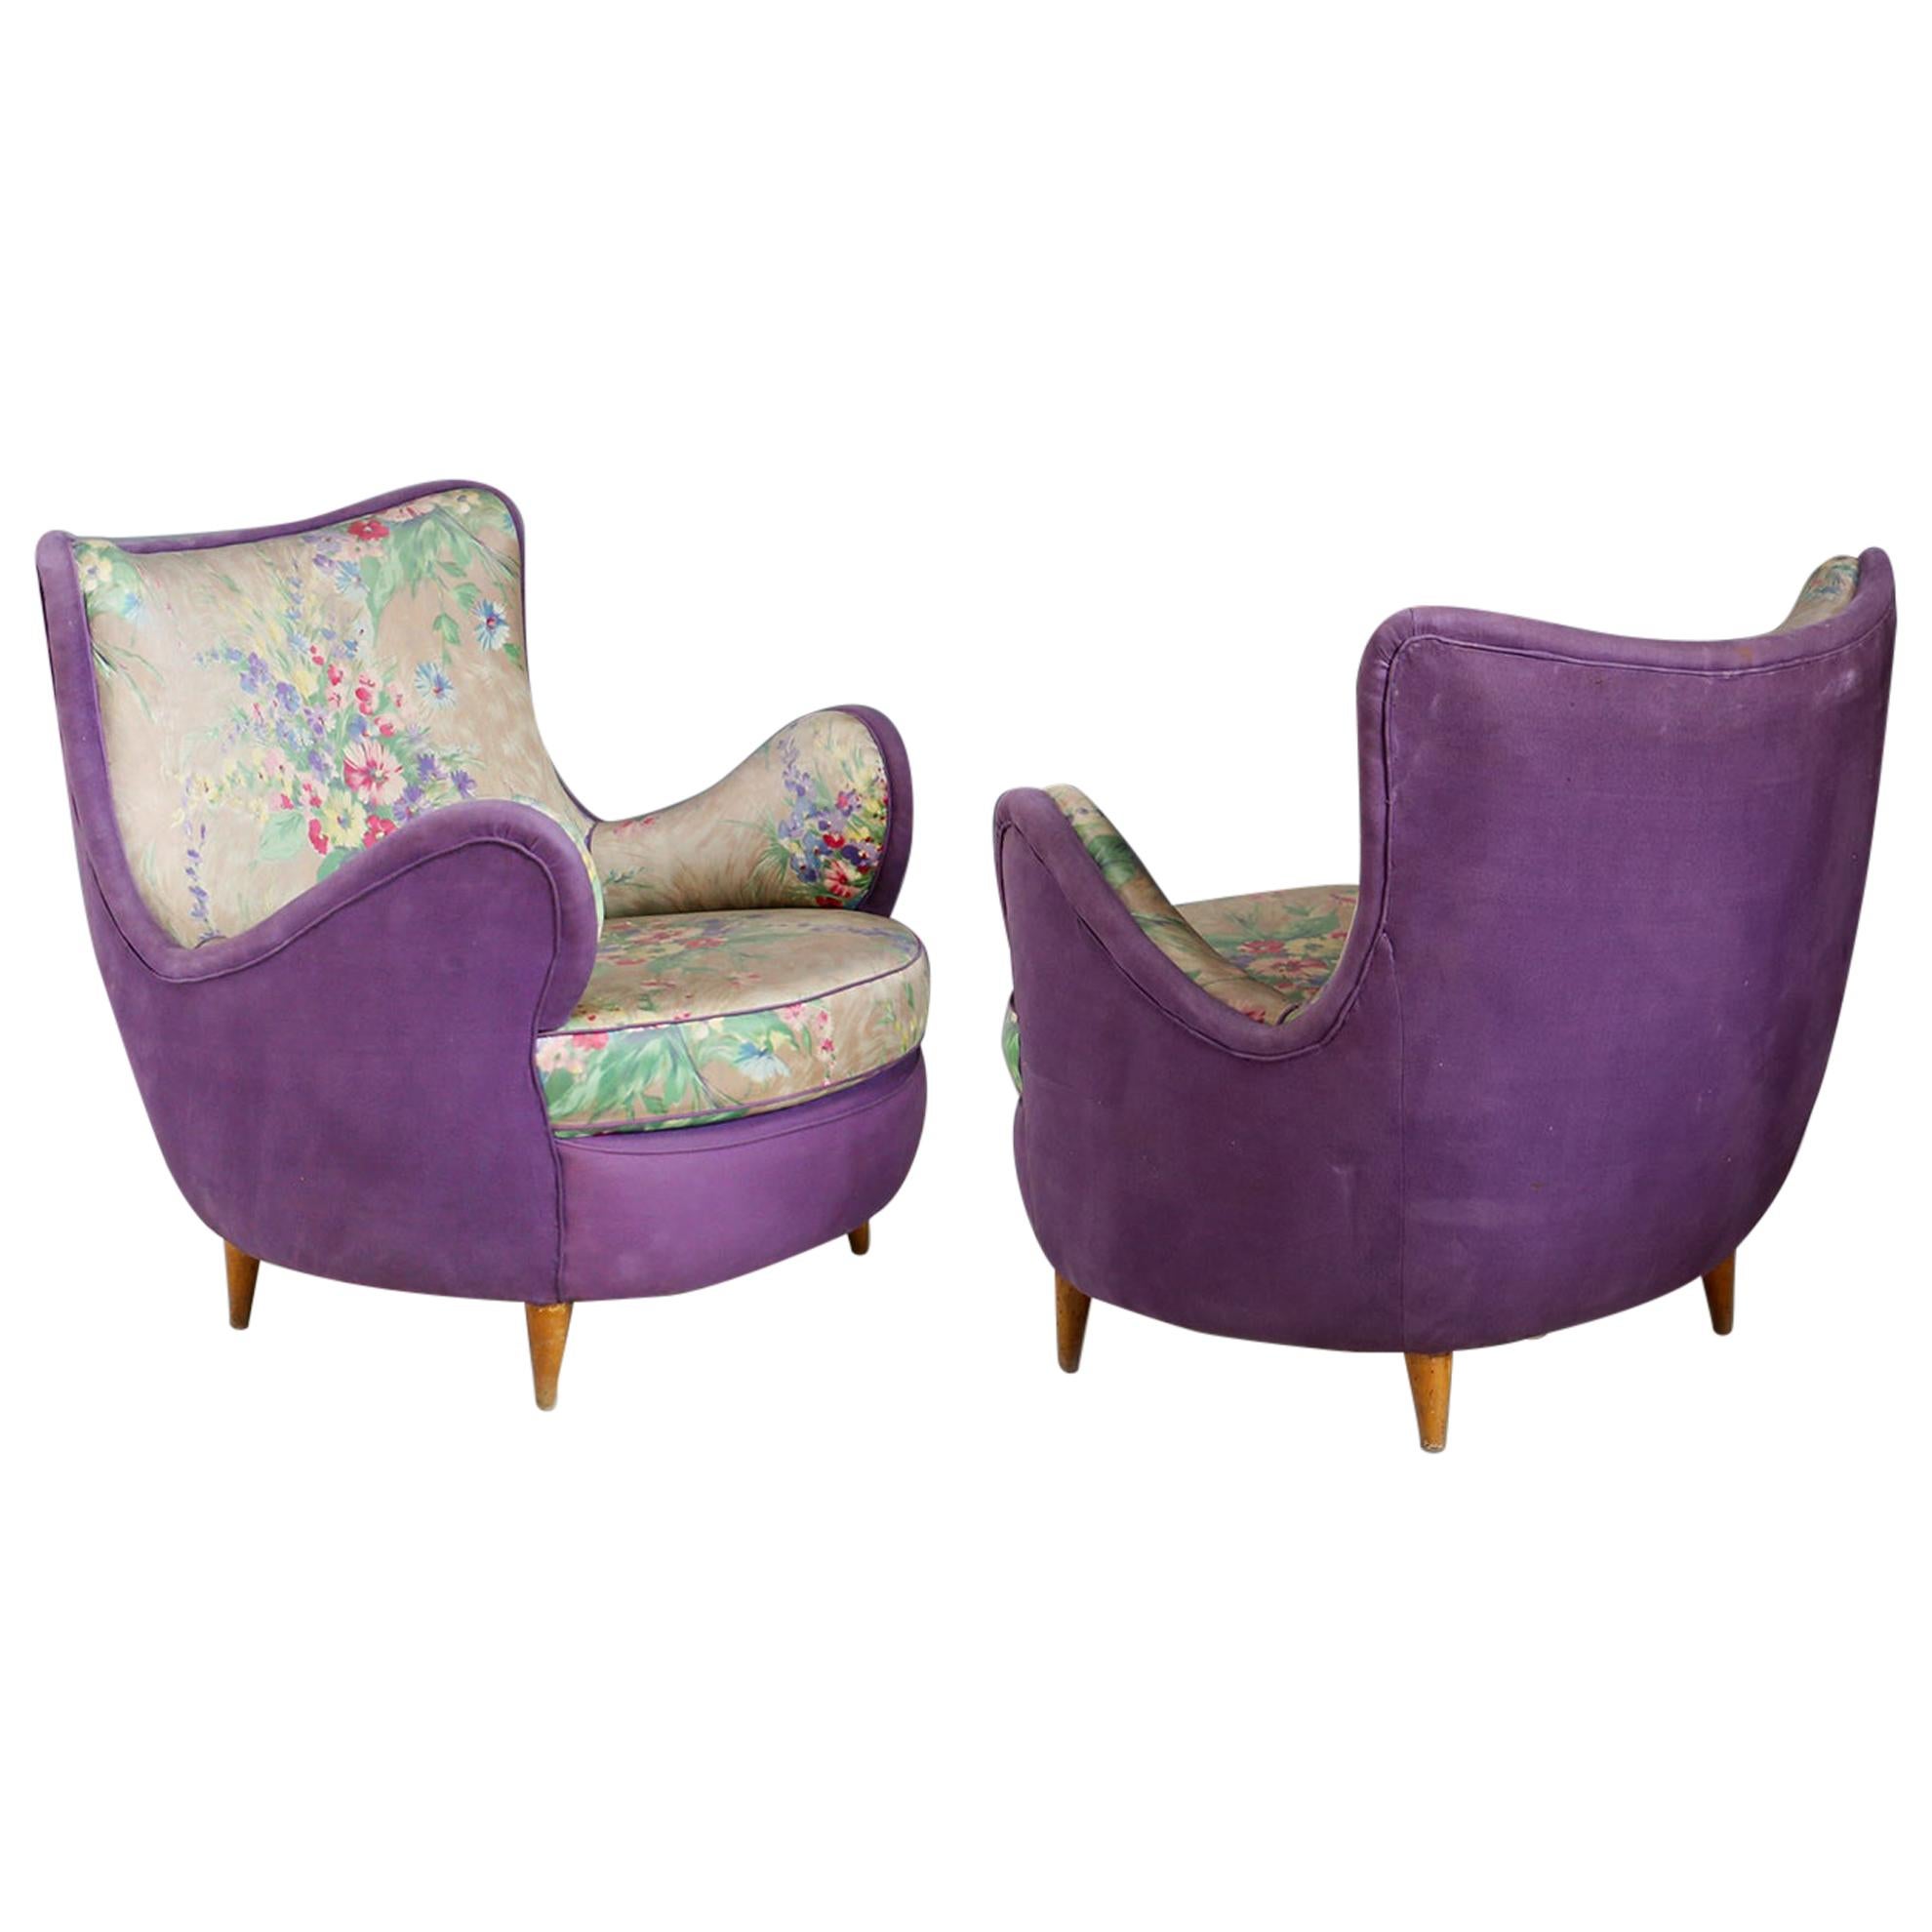 Pair of Midcentury Armchairs Attributed to Rito Valla Fabric Fede Cheti Purple